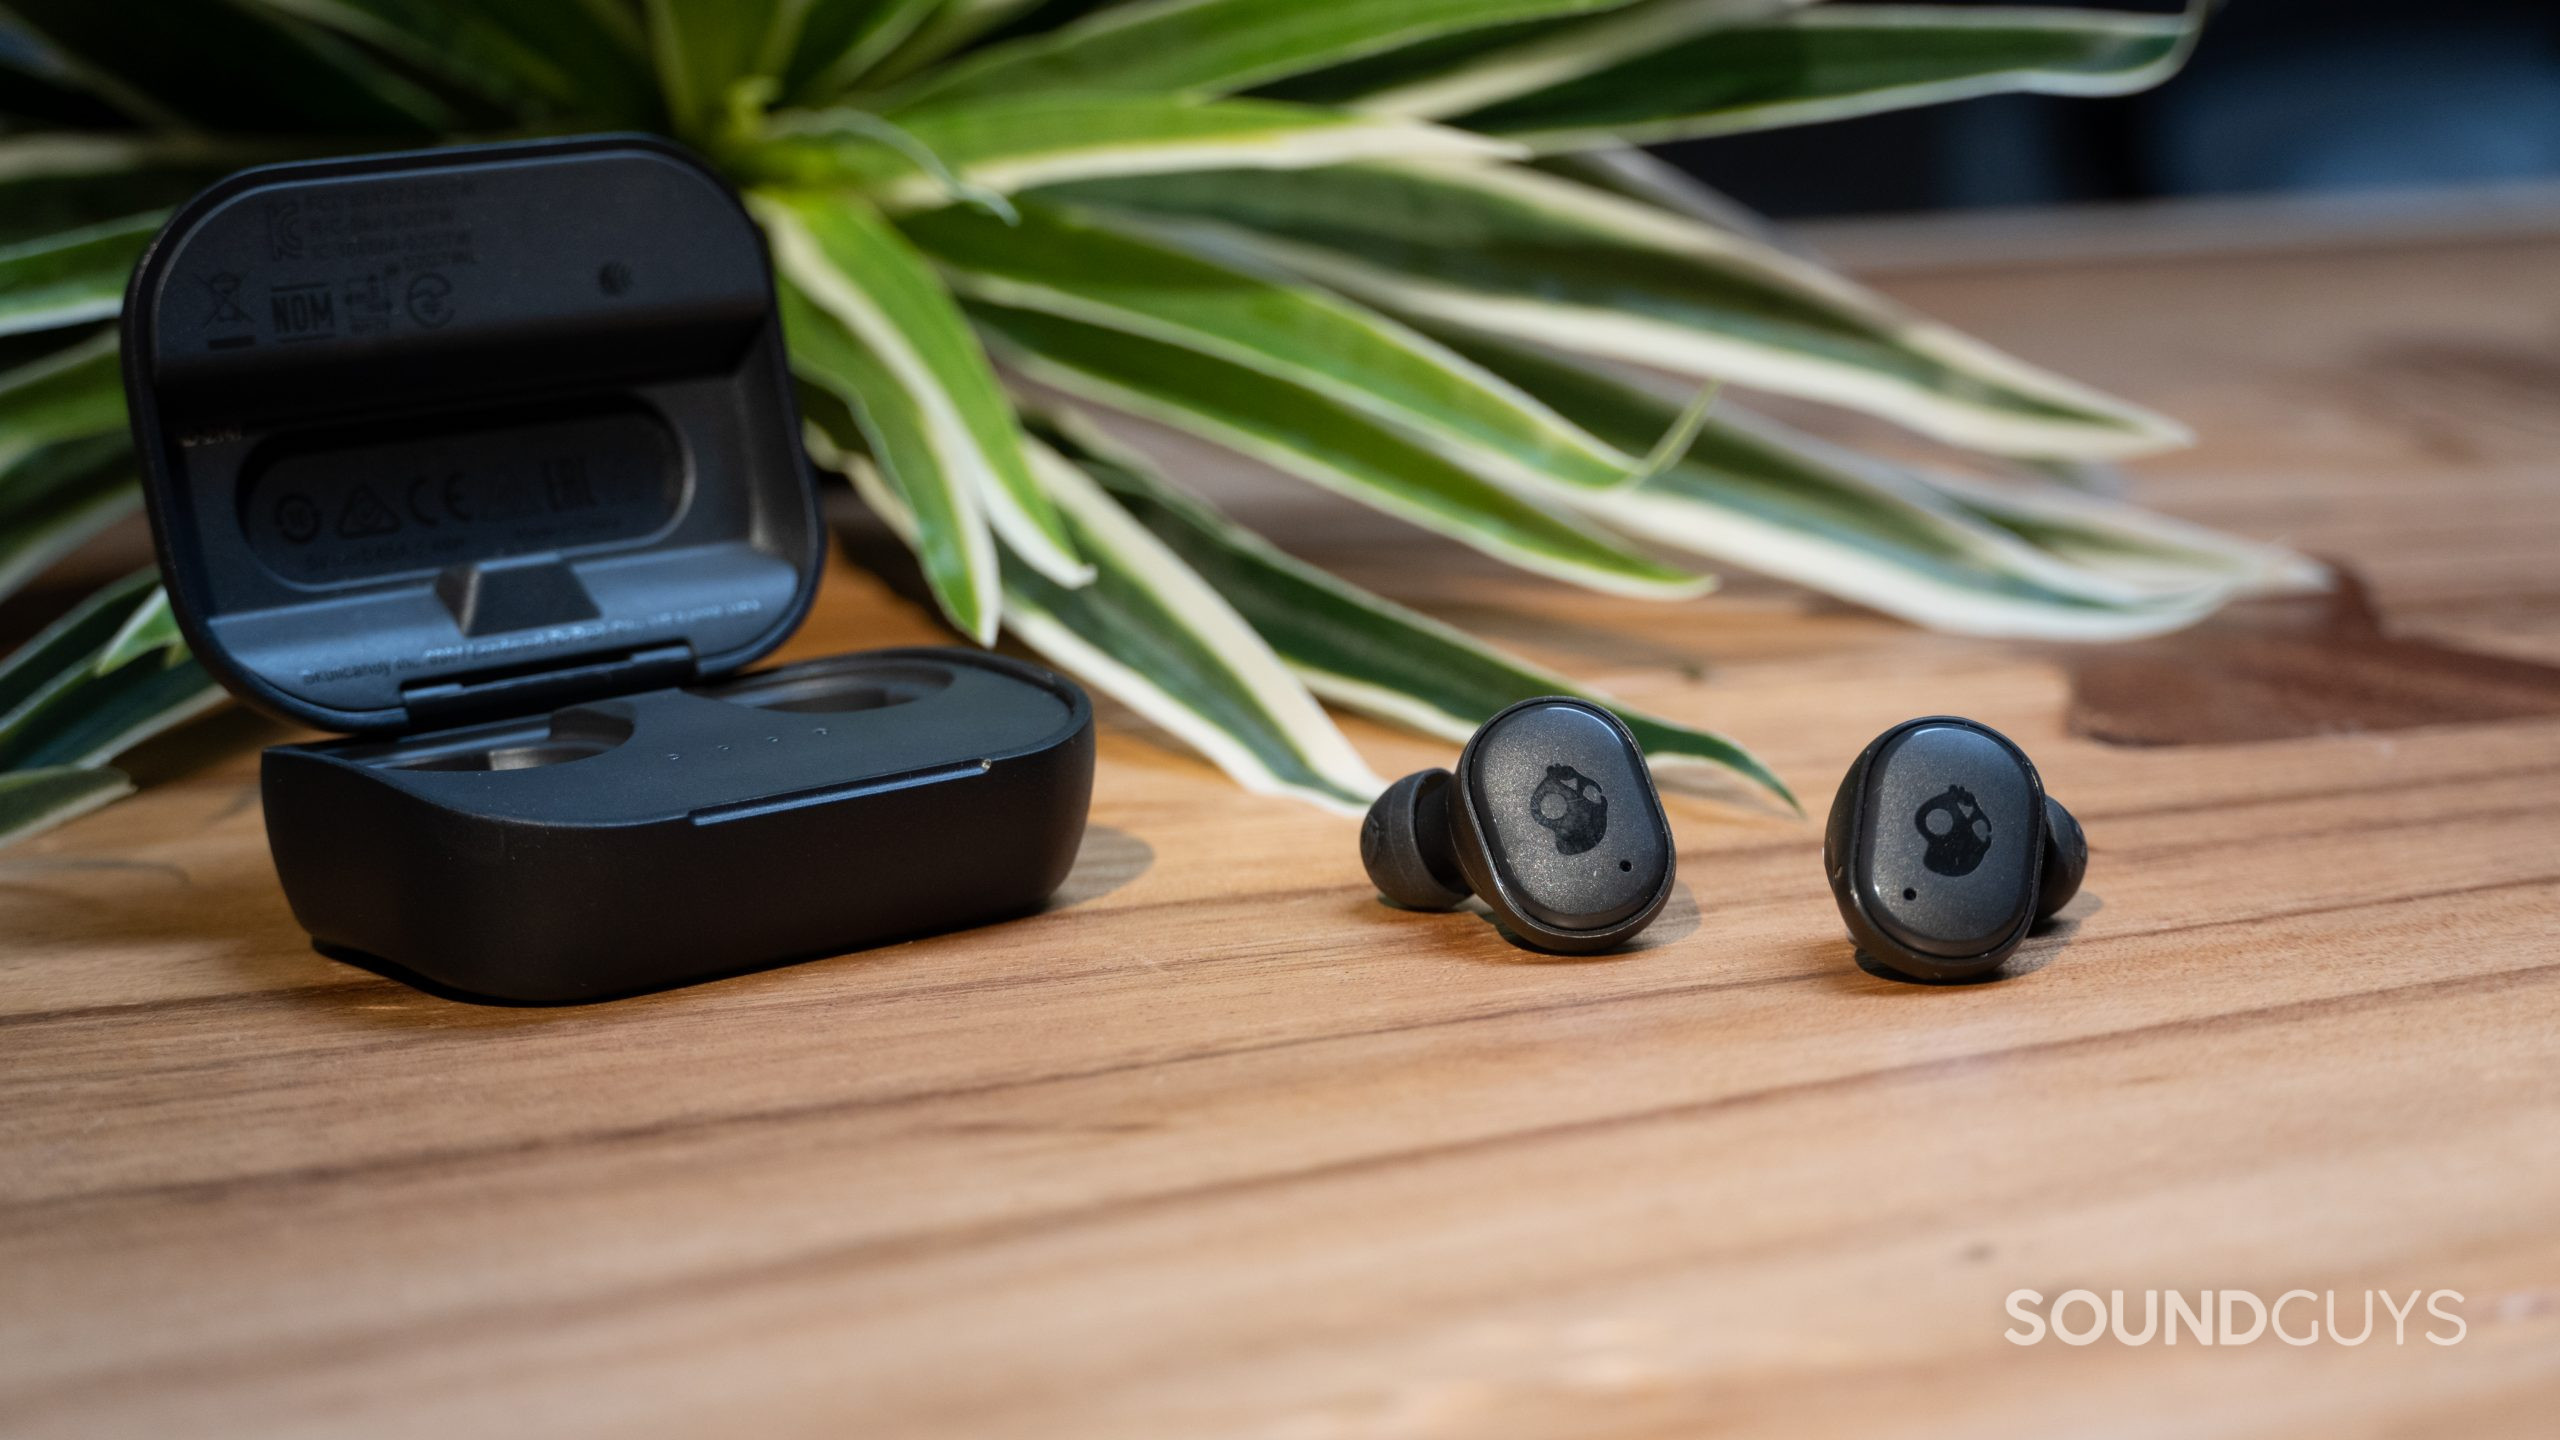 Skullcandy Grind True Wireless Earbuds on table in front of plant